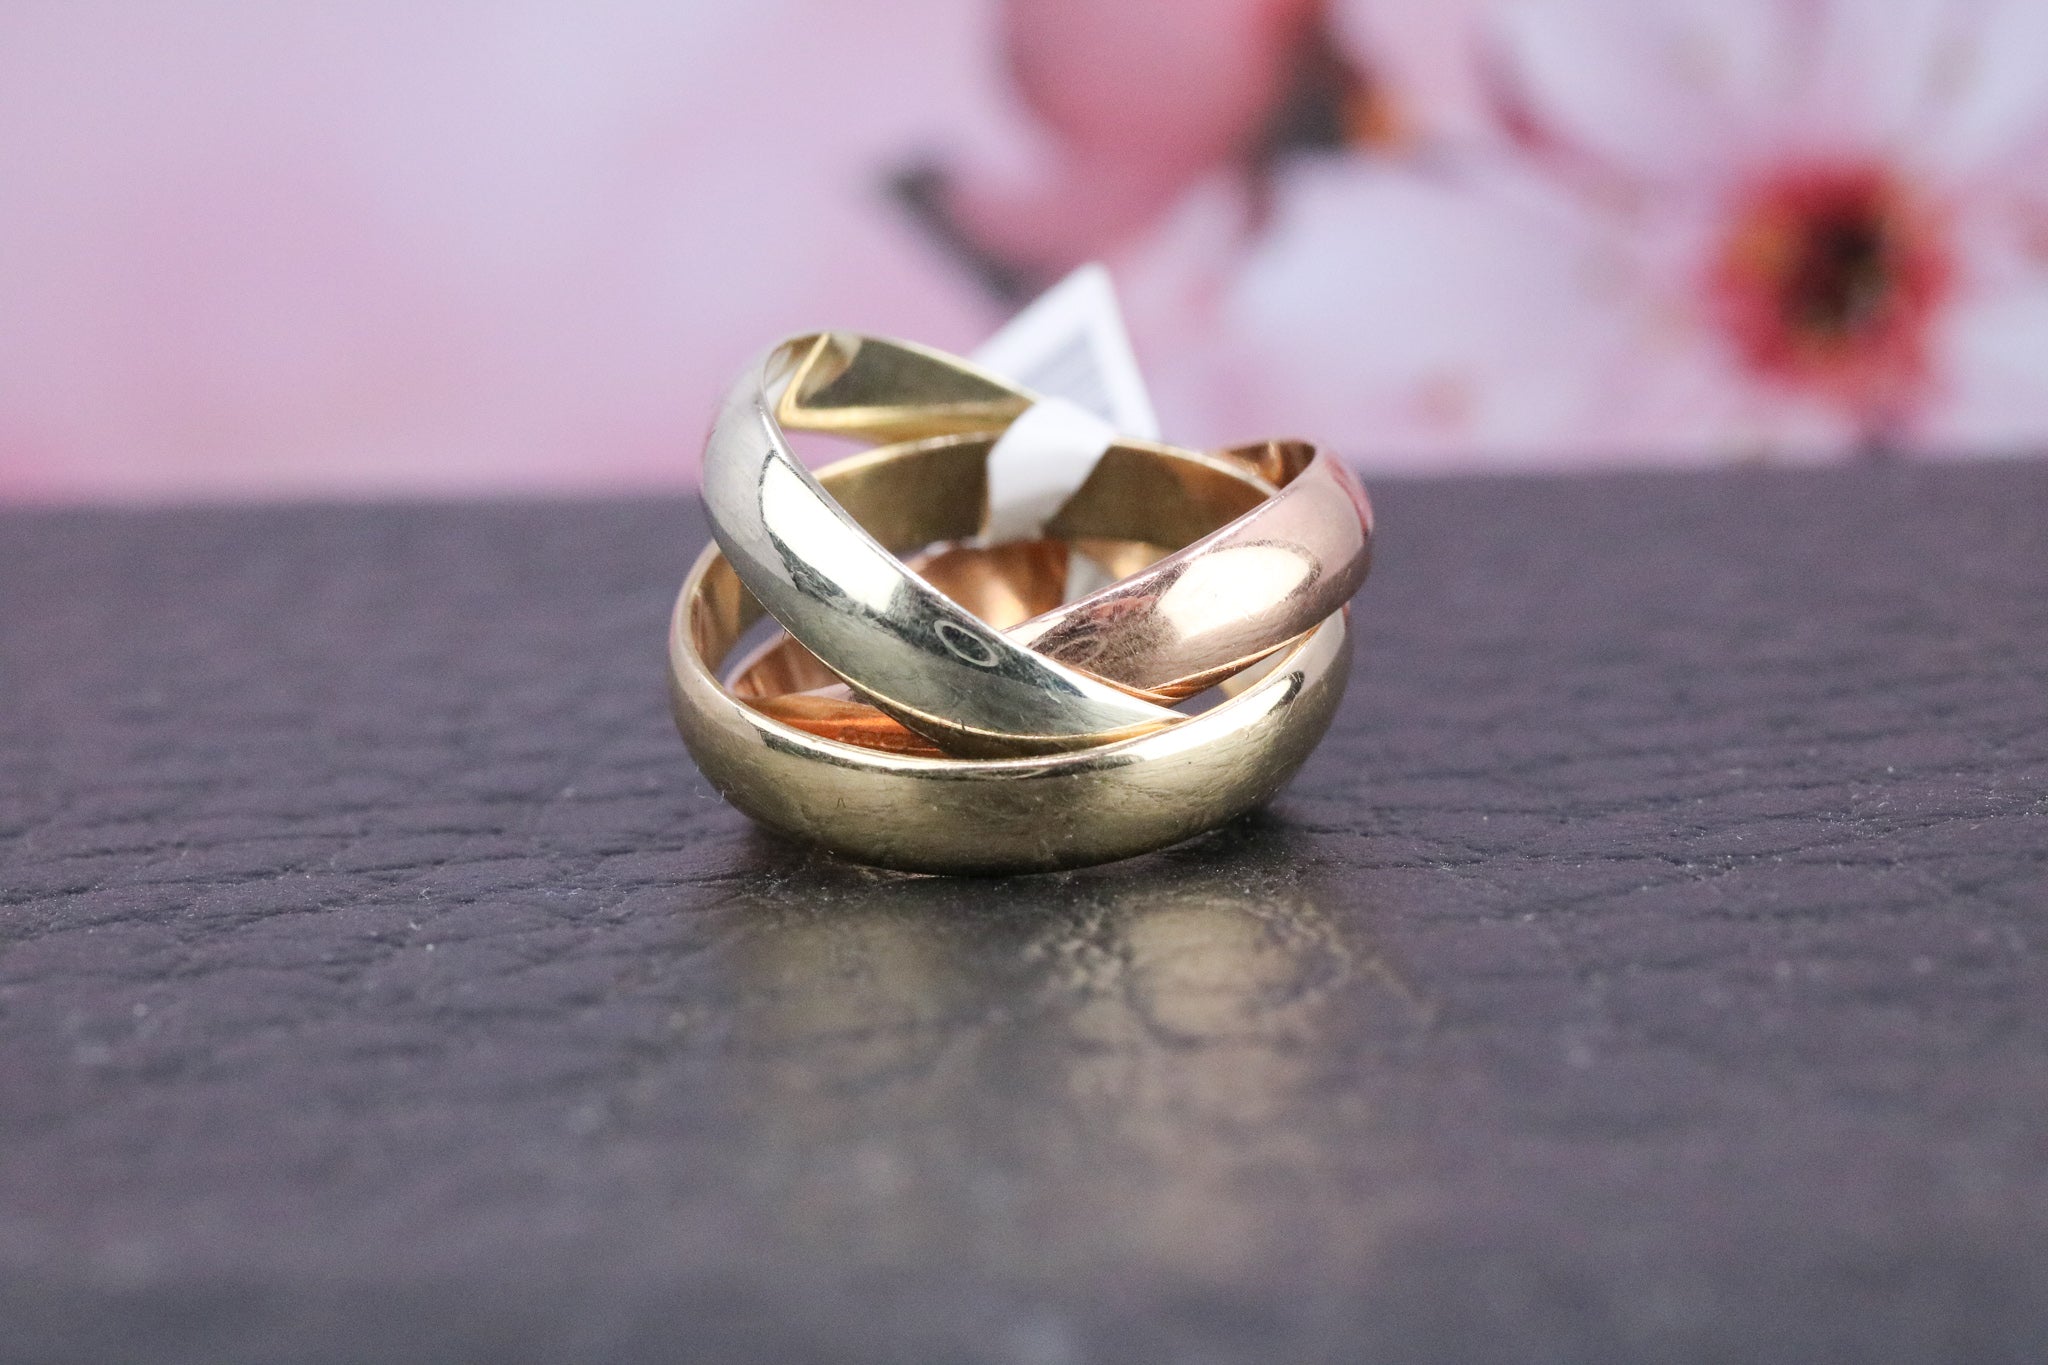 9ct Tri-Tone Gold Ring - CO1370 - Hallmark Jewellers Formby & The Jewellers Bench Widnes